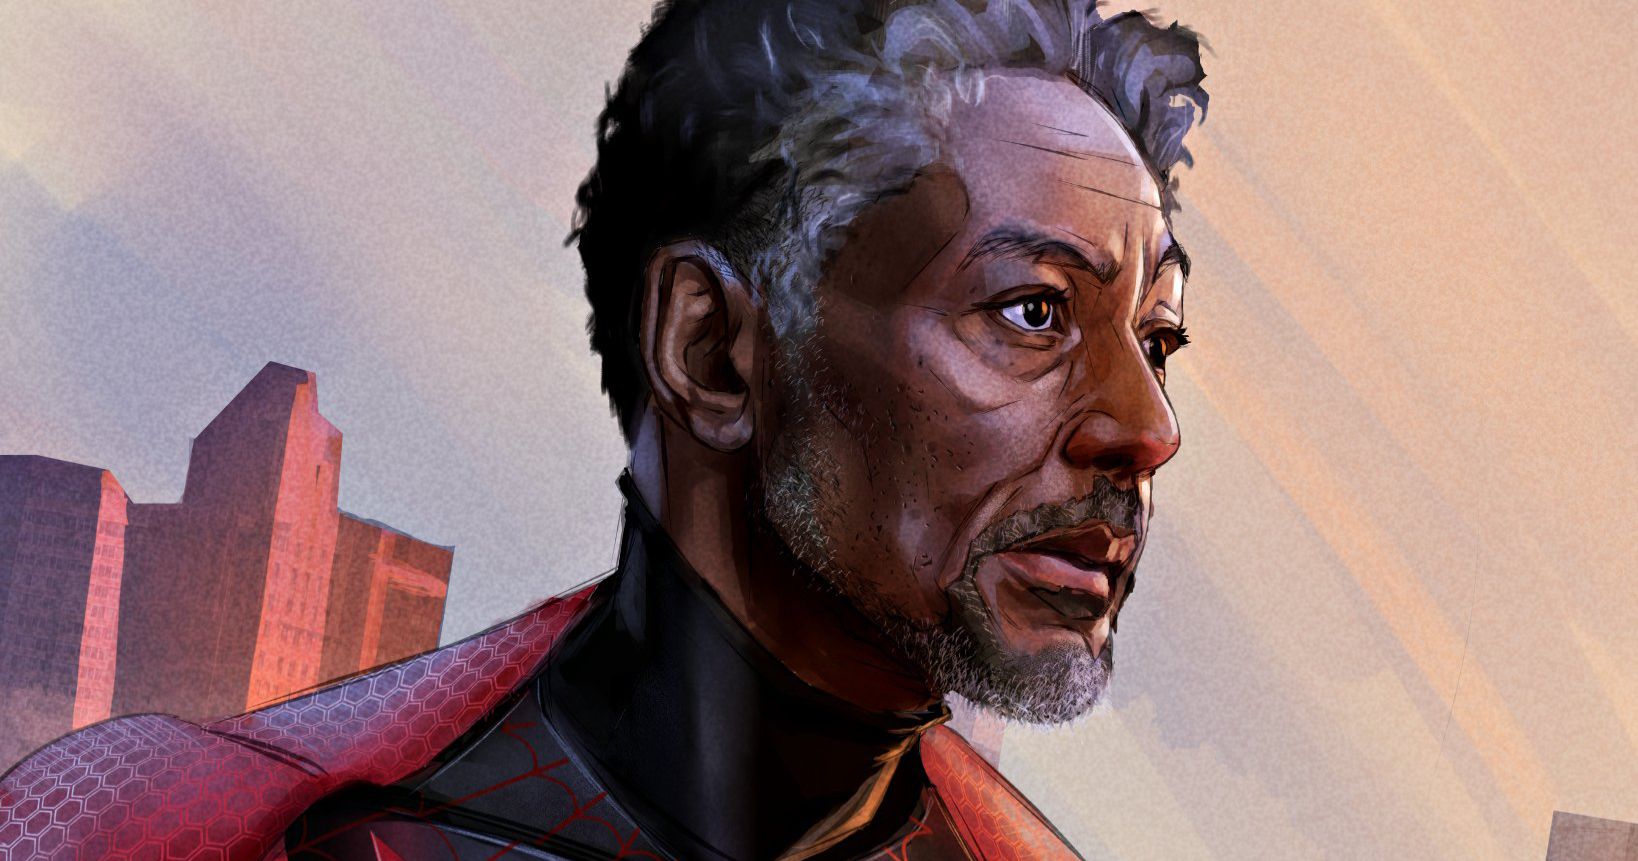 Spider-Gus: Giancarlo Esposito Is Miles Morales in Spider-Man Fan Art and He Loves It